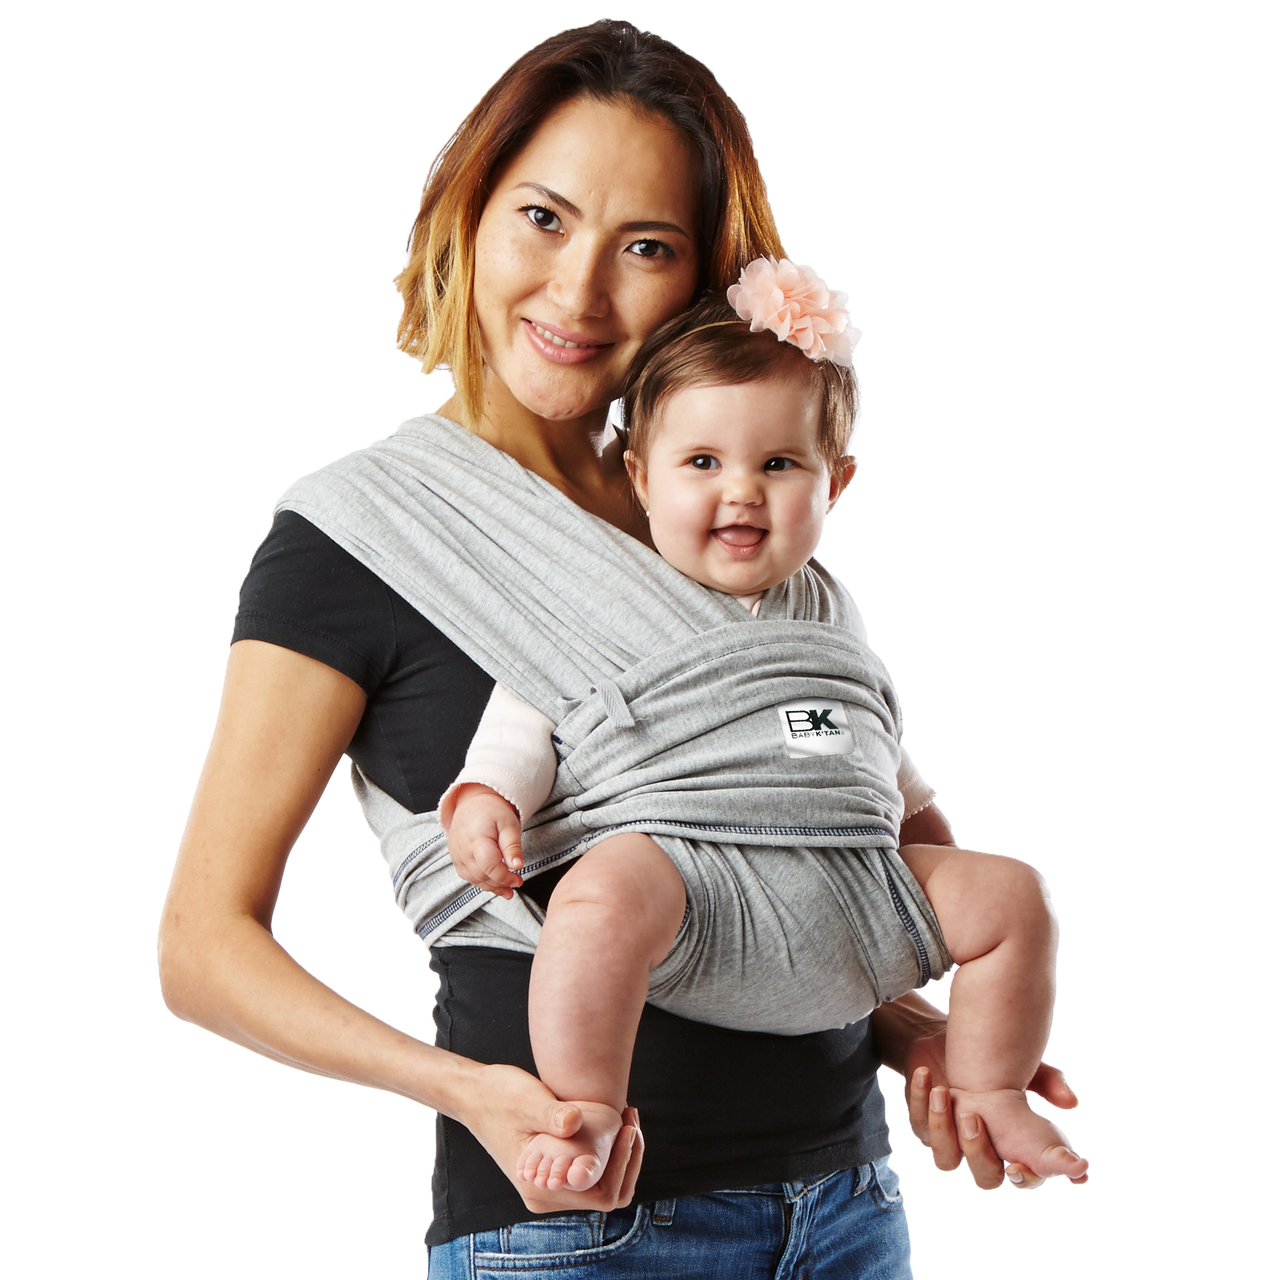 Baby K'tan Baby Carrier Review and 20% off Discount ...